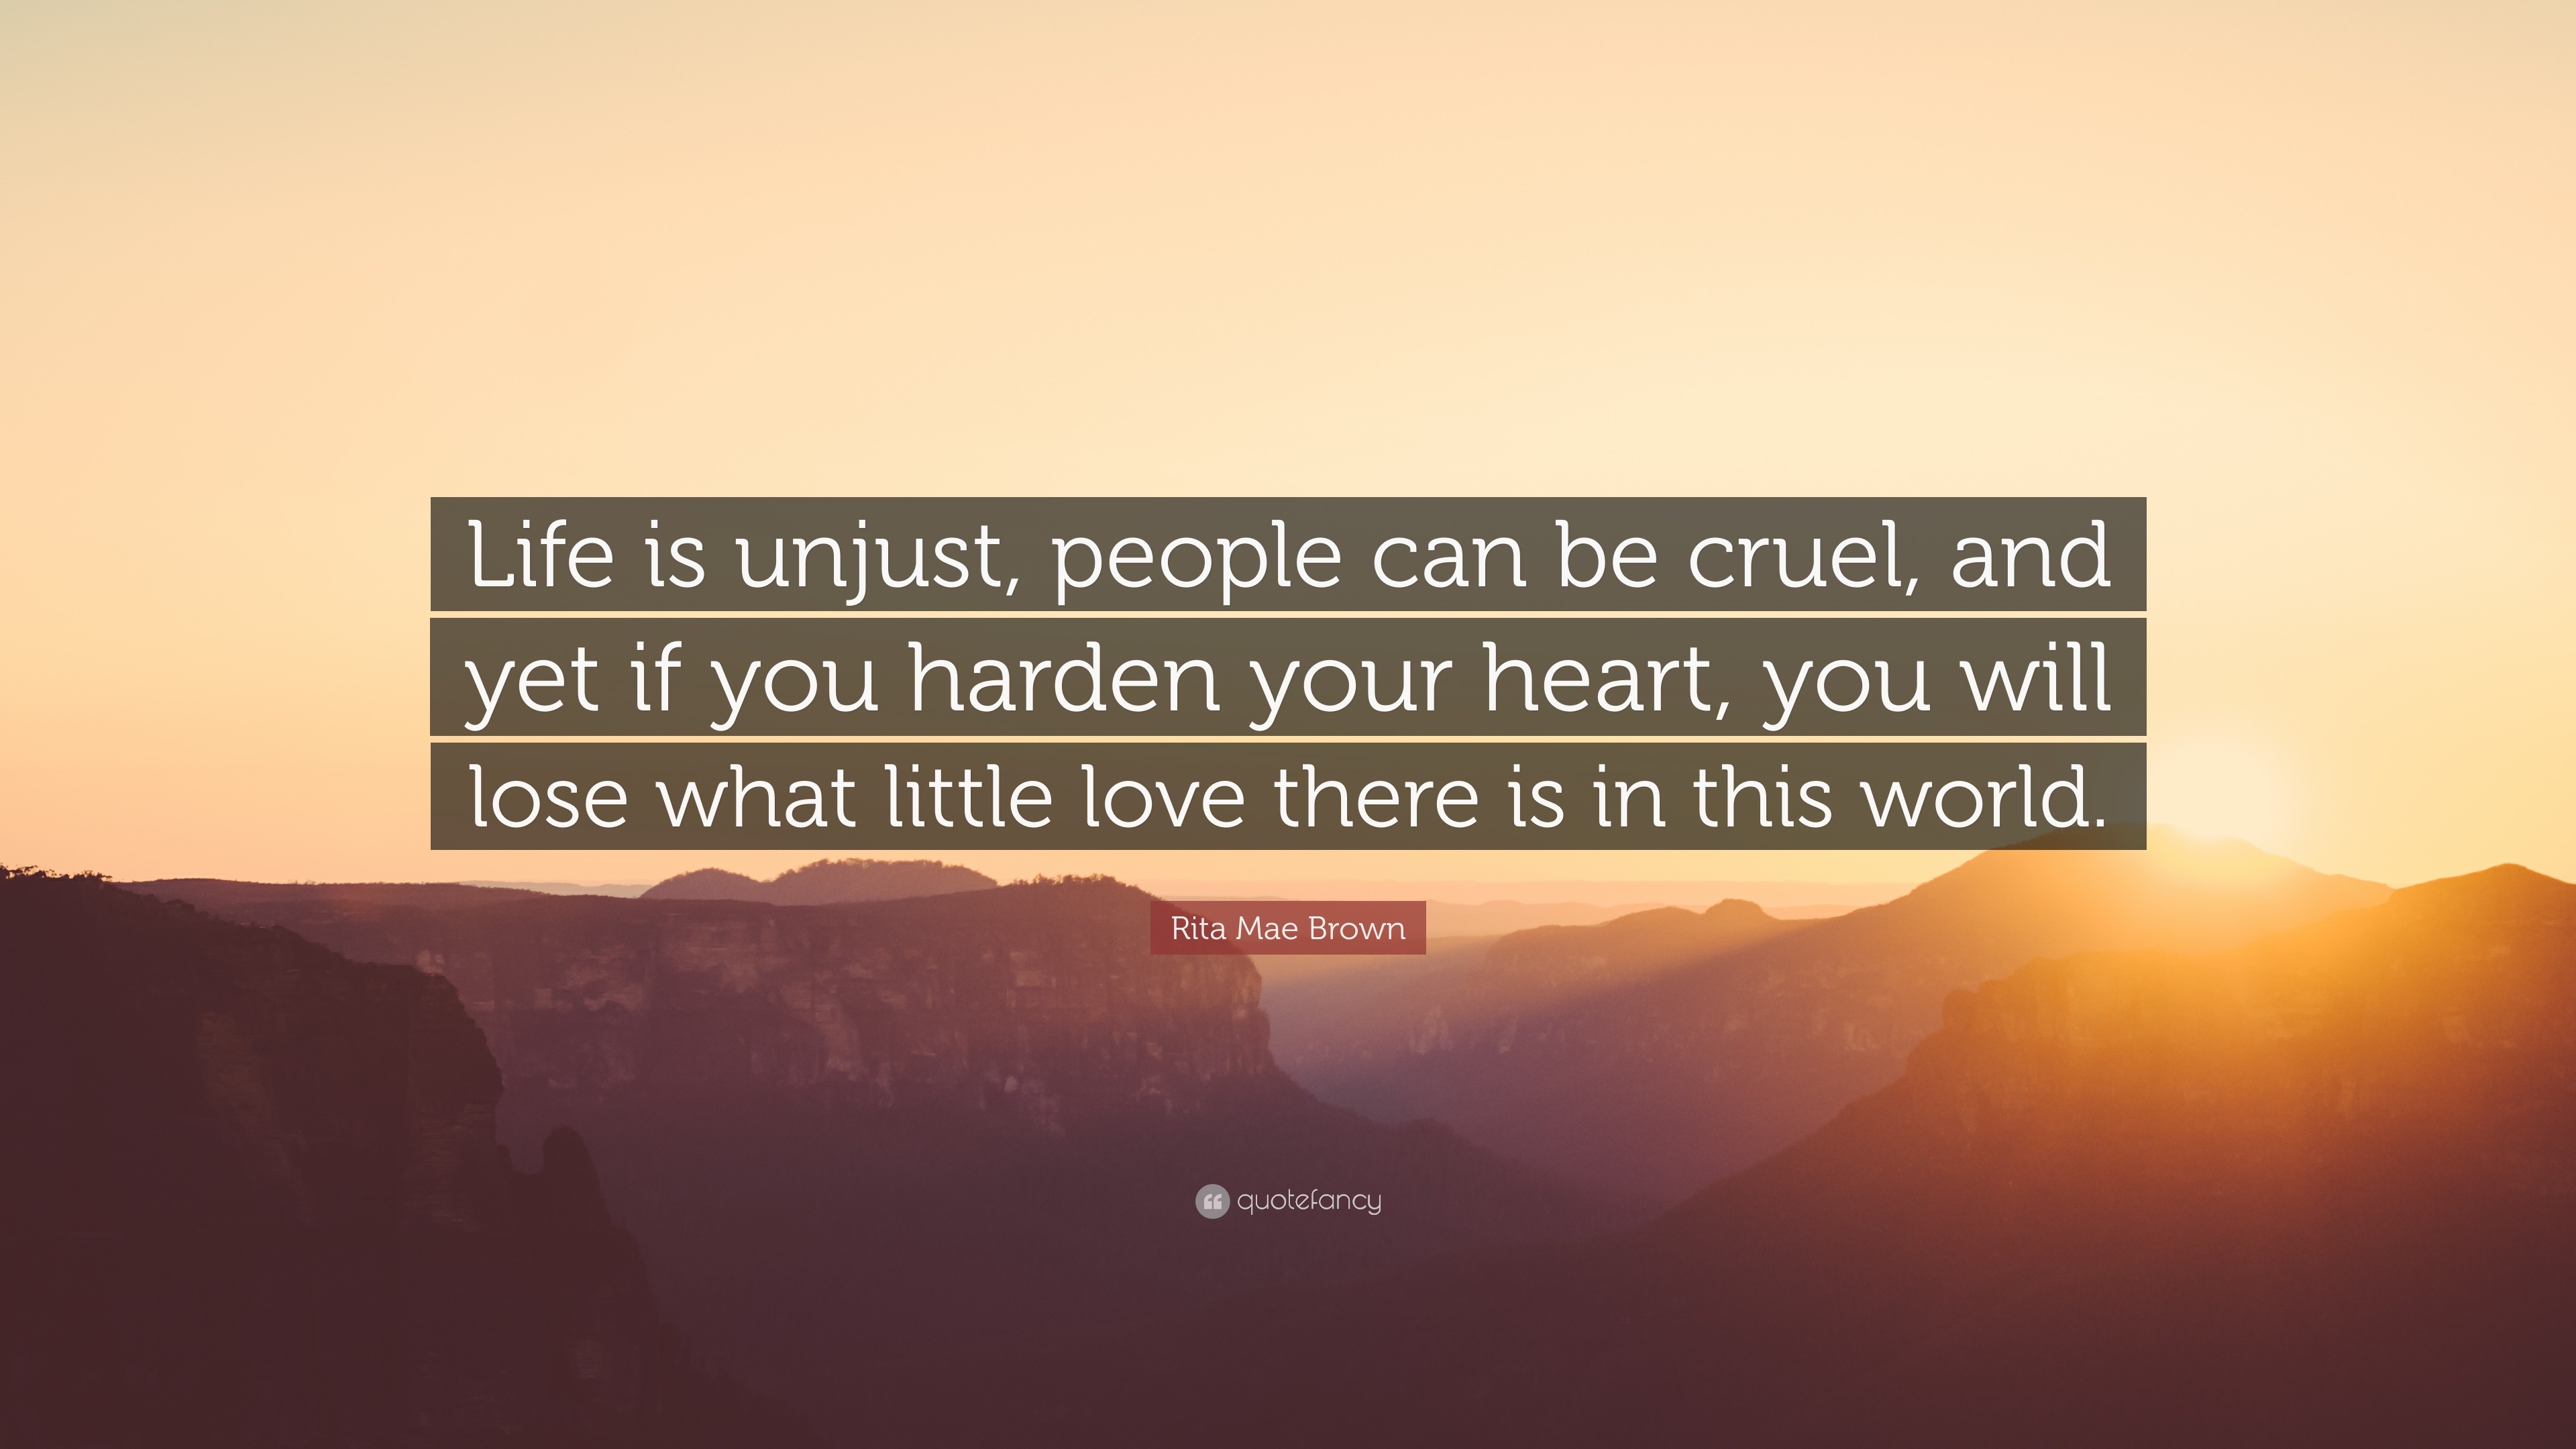 Rita Mae Brown Quote “Life is unjust people can be cruel and